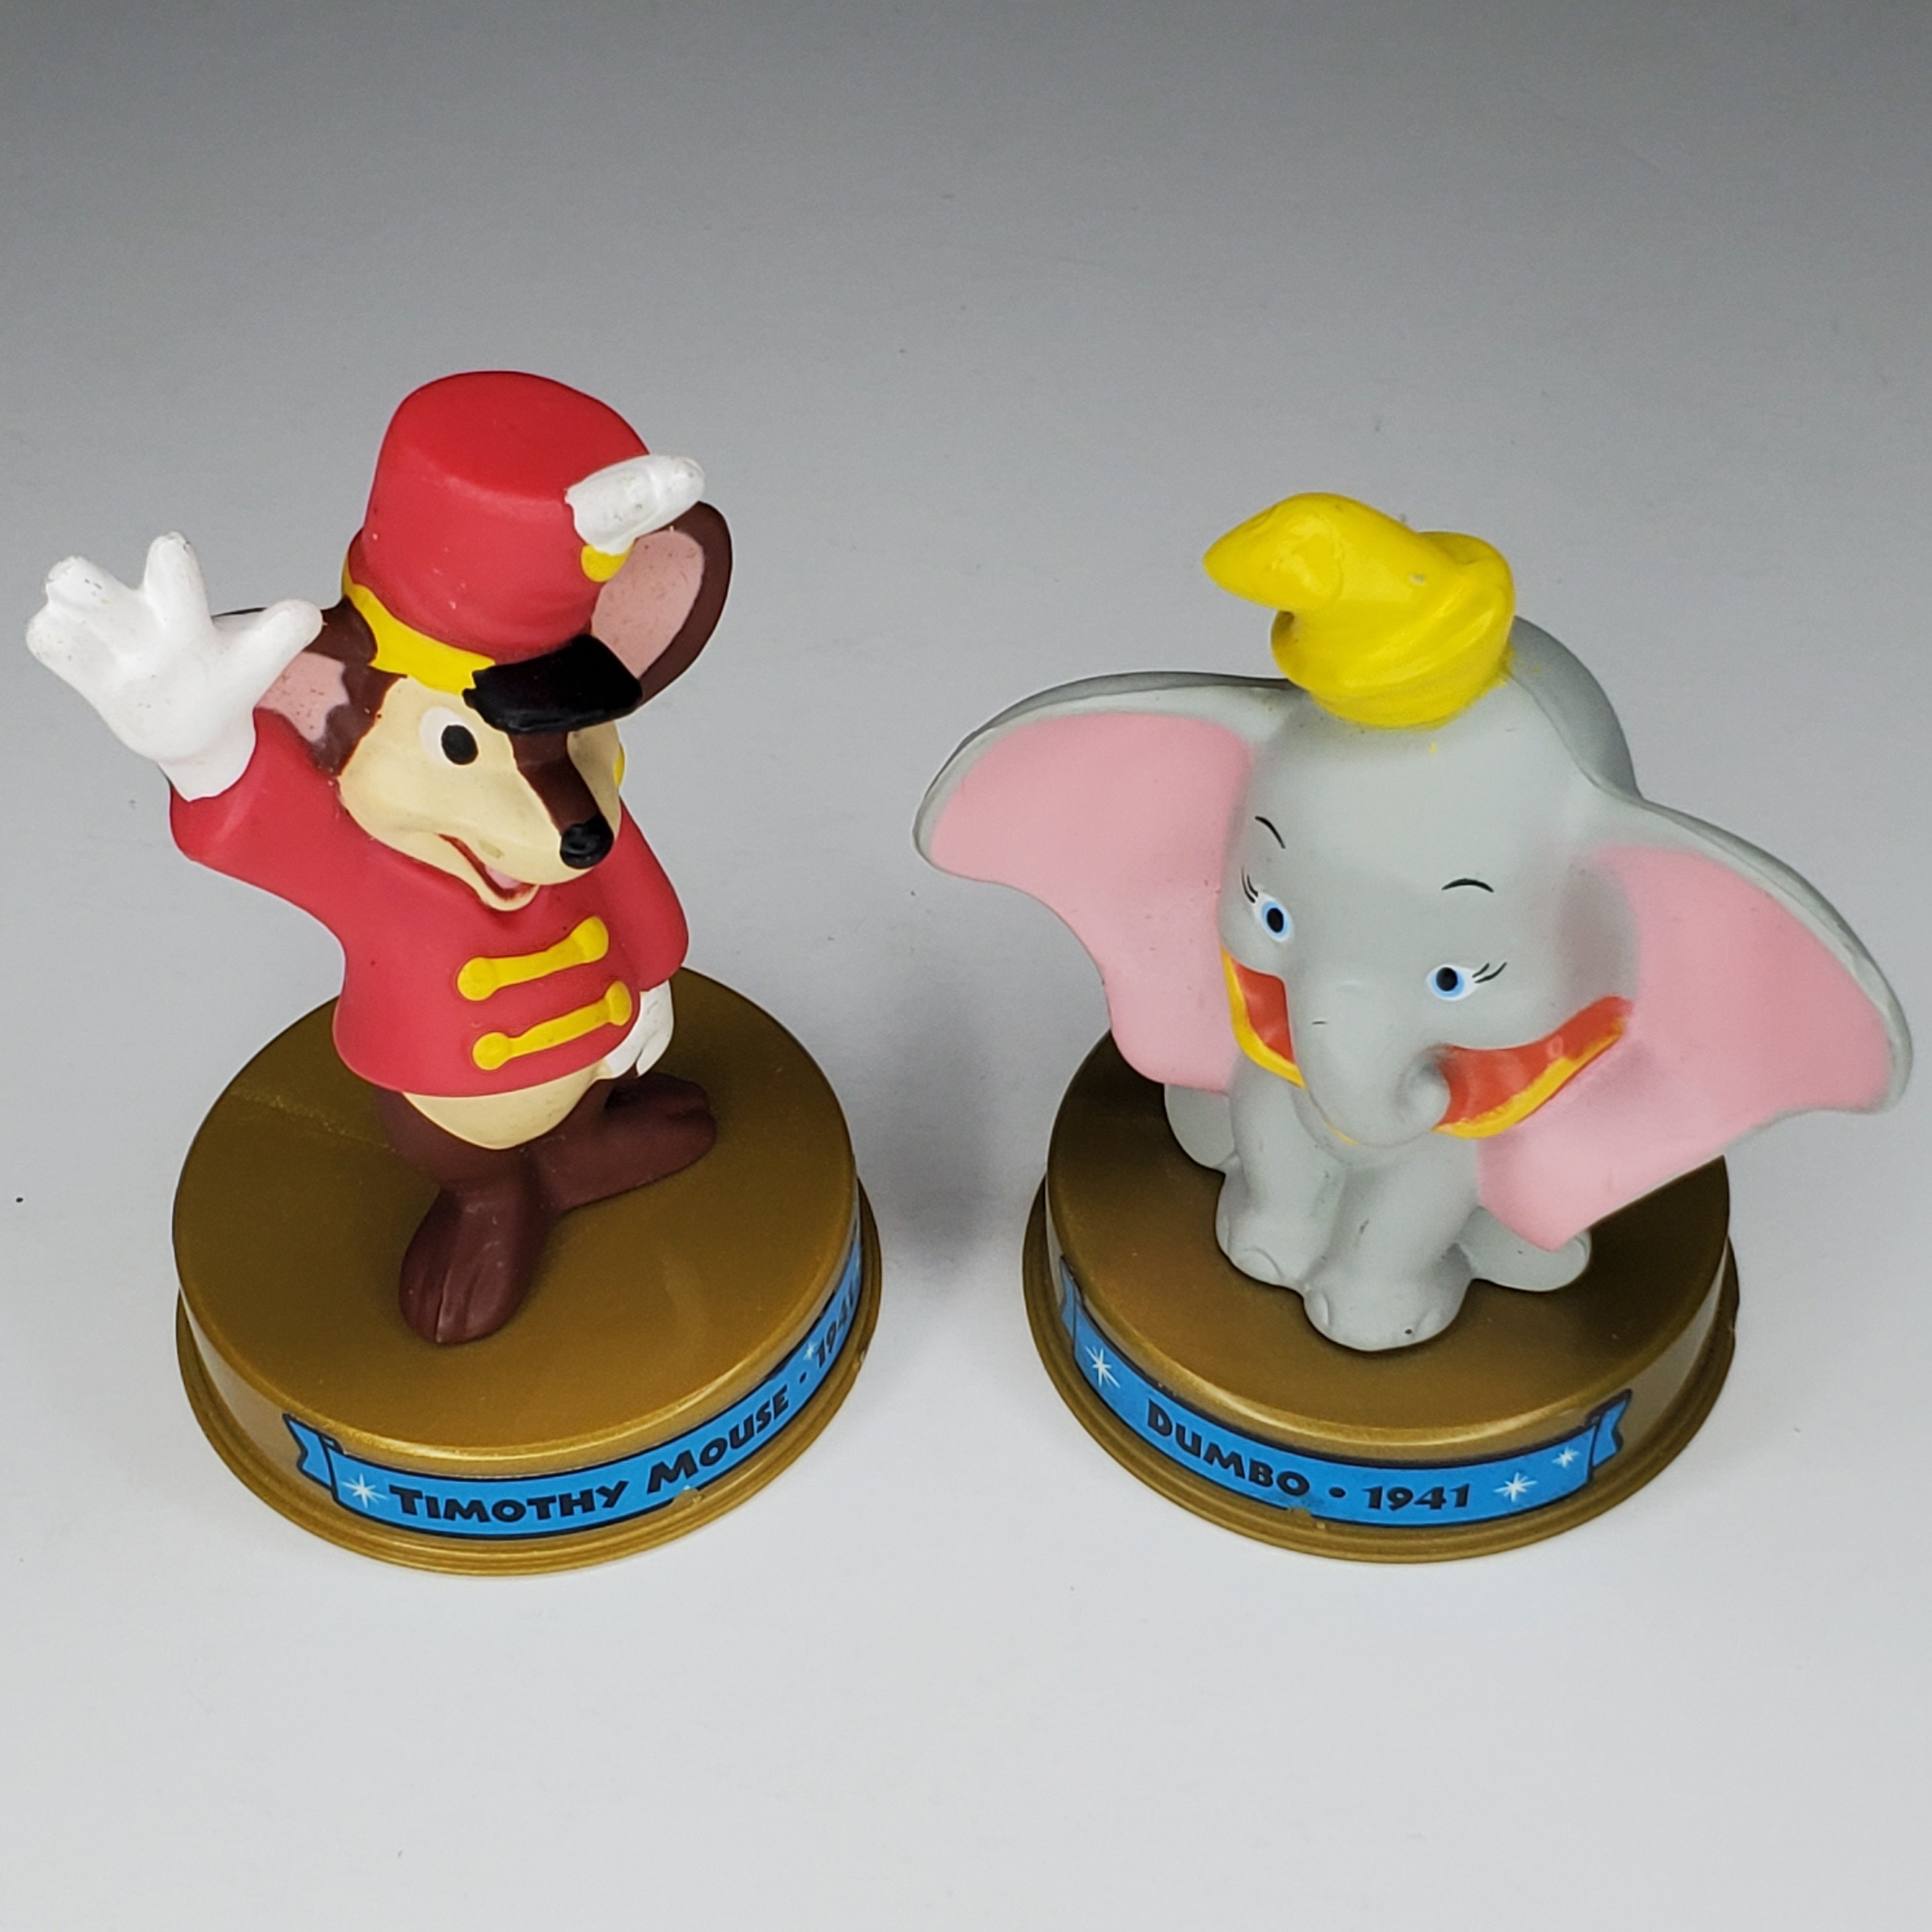 Dumbo Timothy Mouse Figurines Disney's 100 Years of Magic